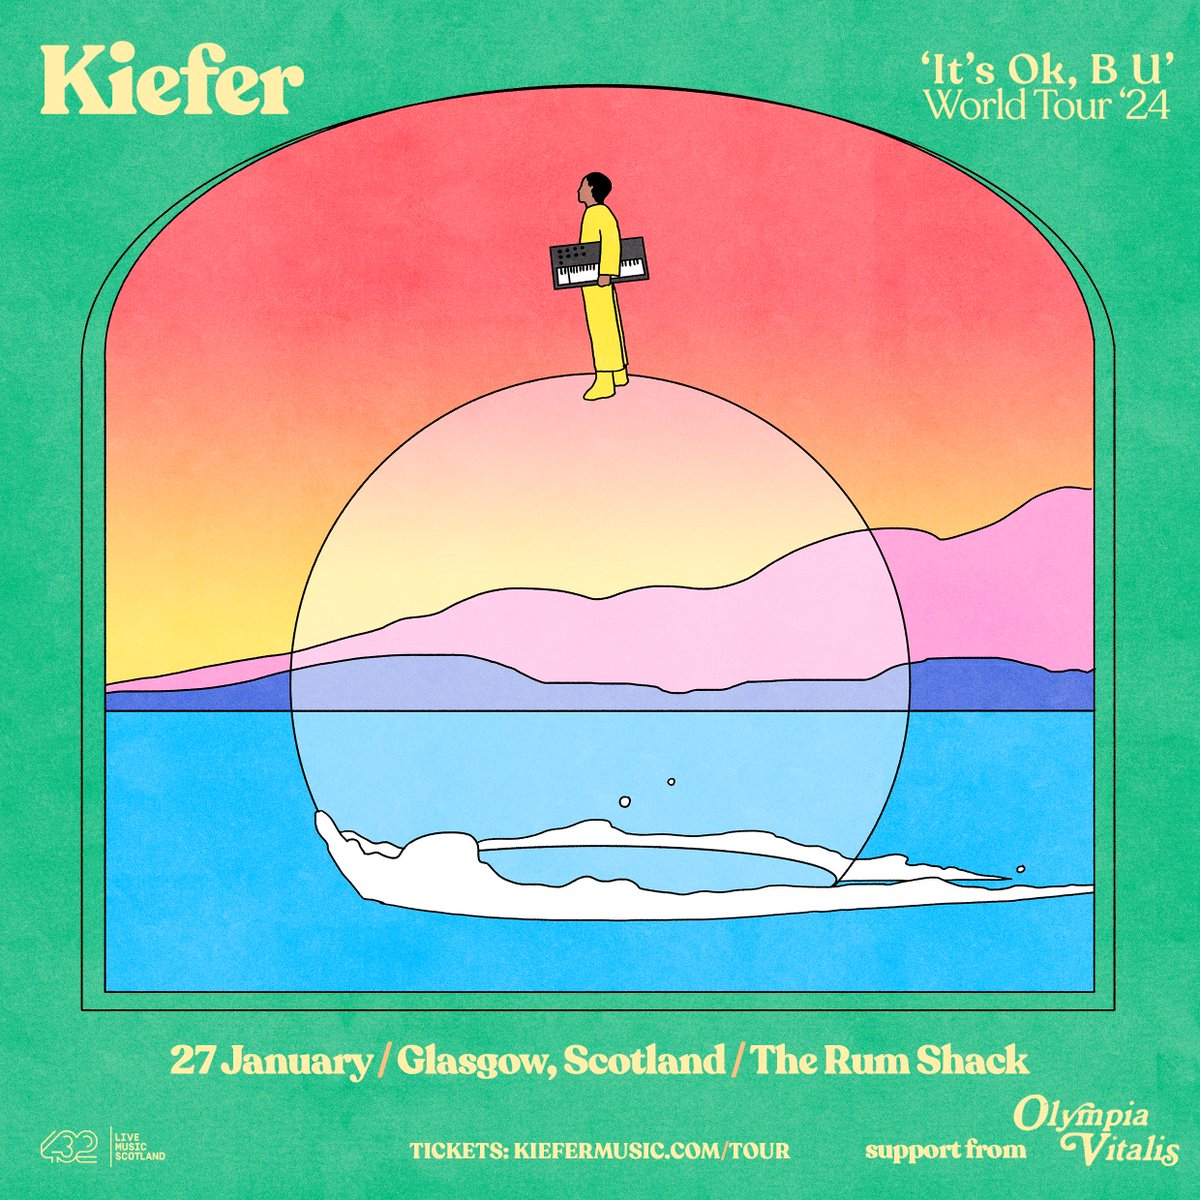 SUPPORT ANNOUNCE London Soul singer Olympia Vitalis opens up the show for Kiefer down at The Rum Shack Glasgow next Saturday ✨ Jan 27th 2024. Remaining tickets on sale now! 📷: bit.ly/3POmuEp